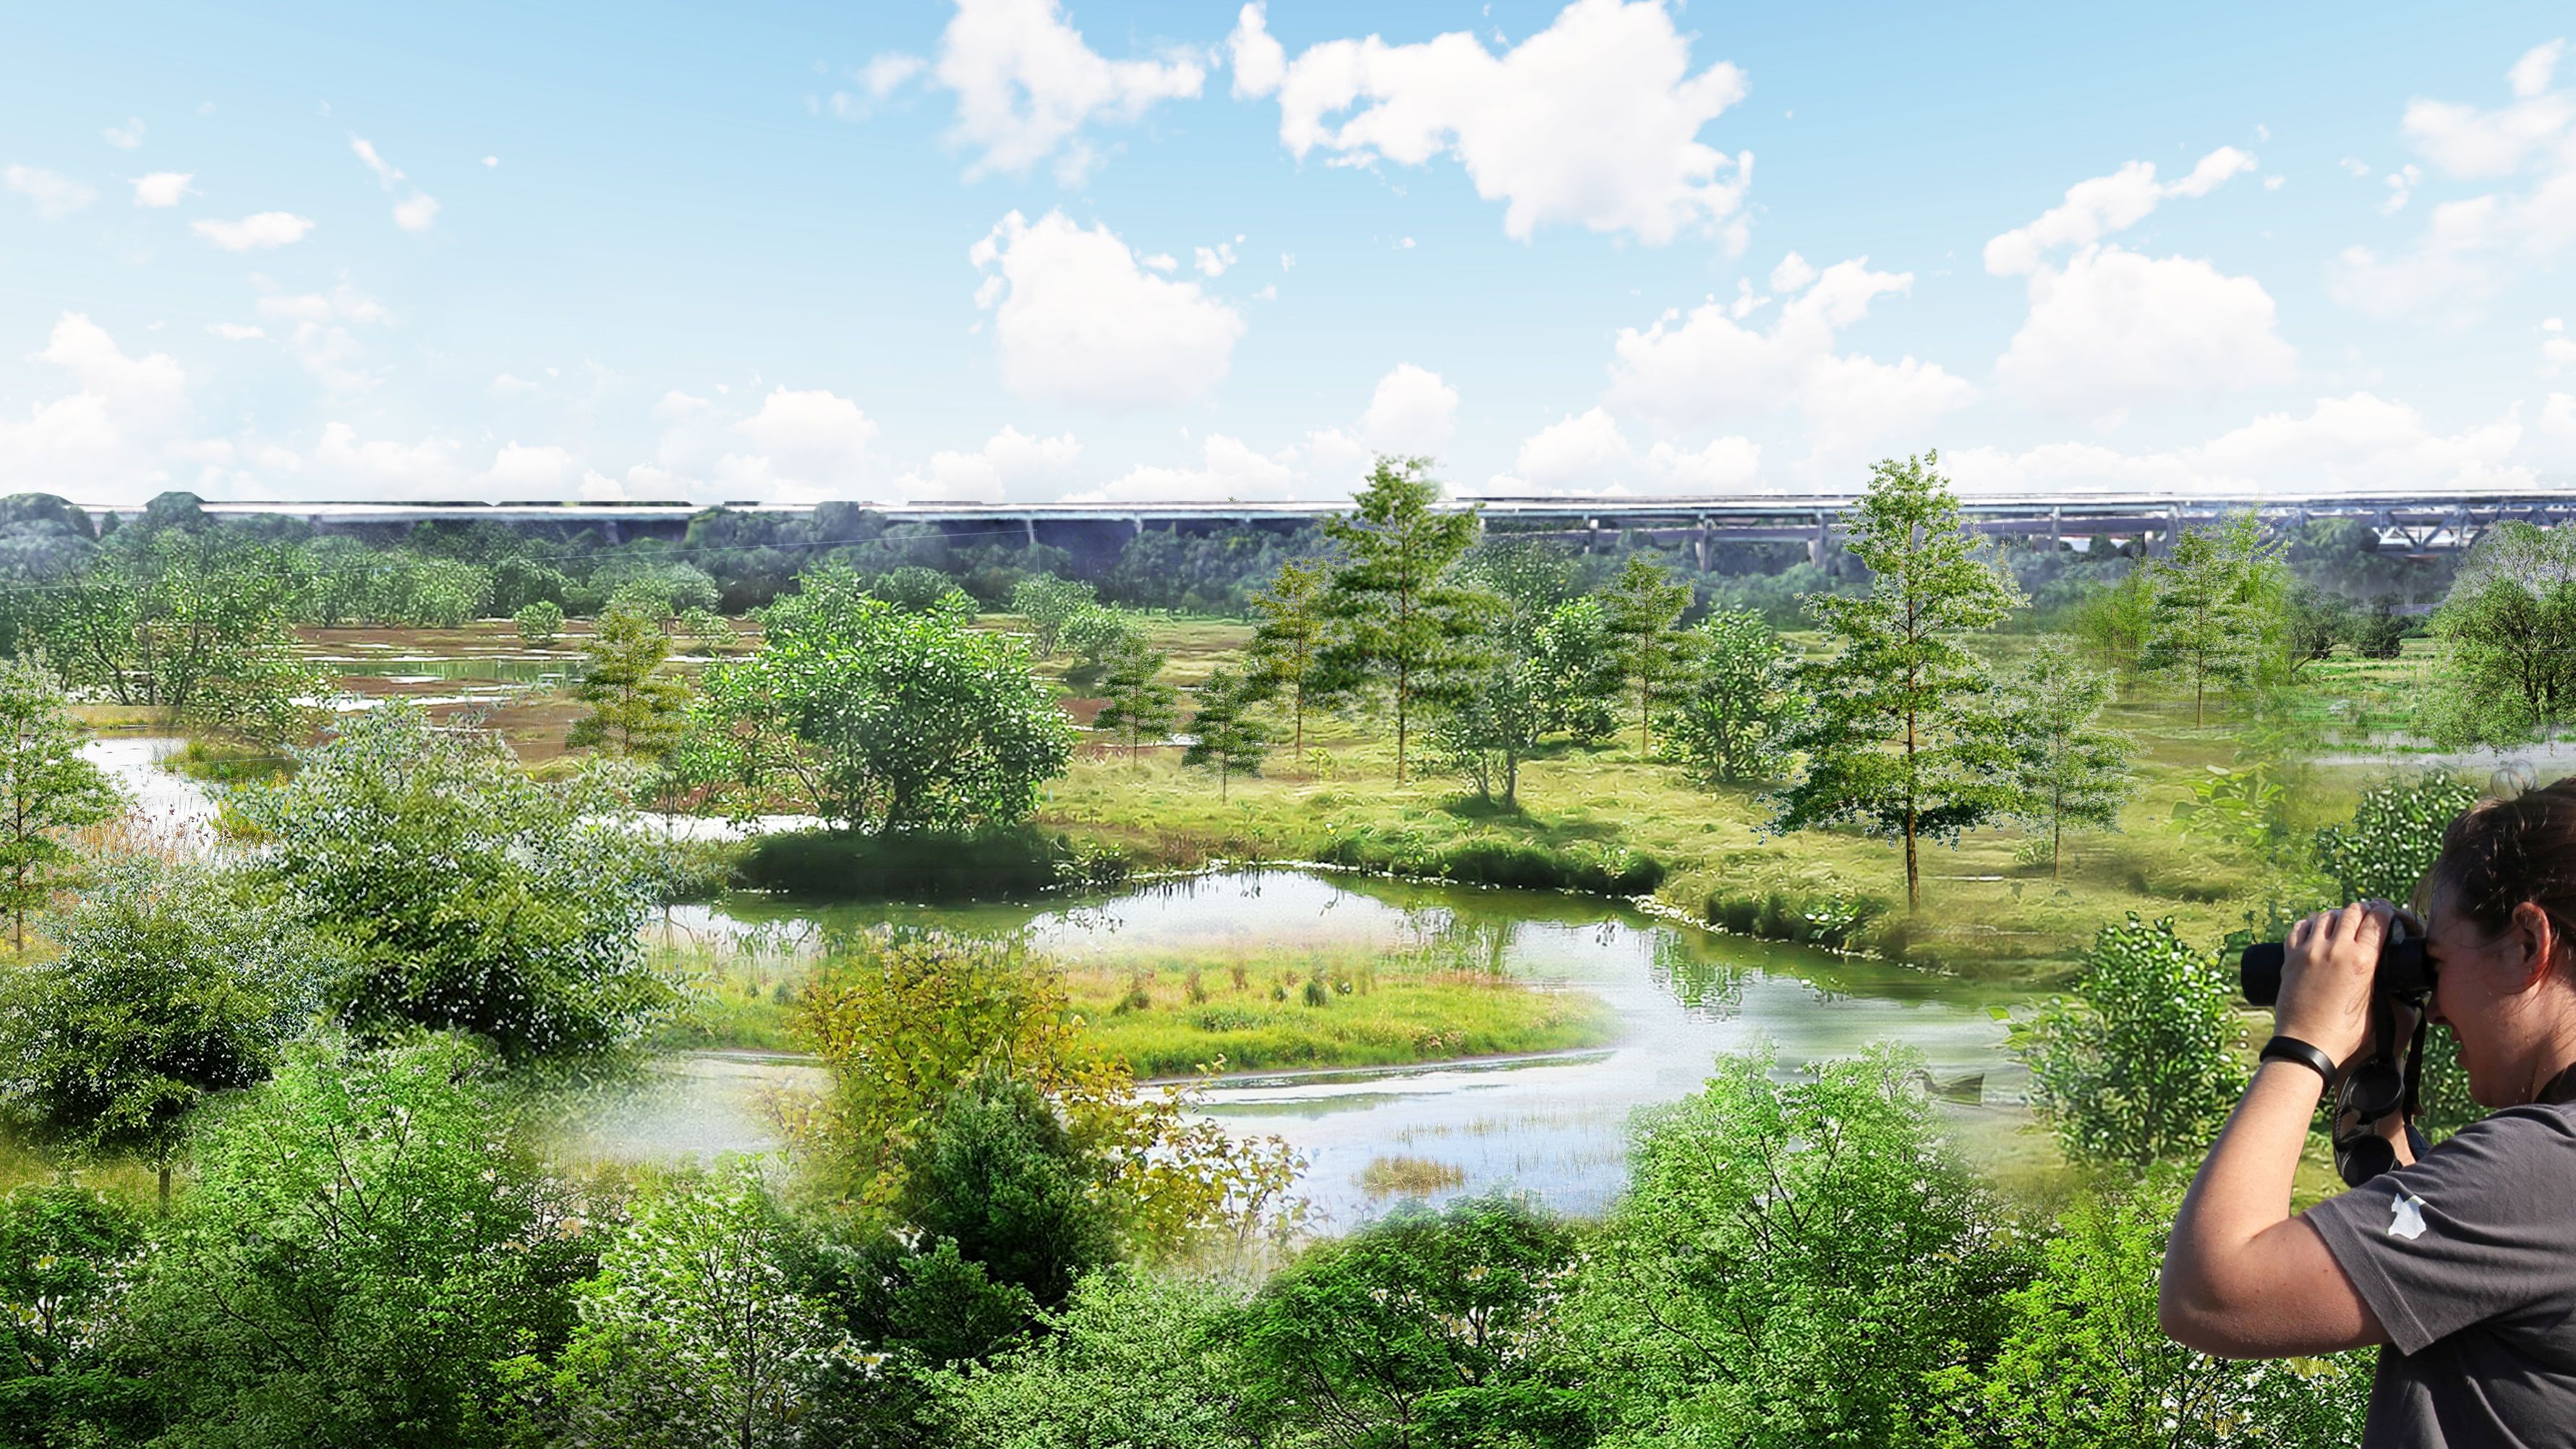 A rendering of the wetland project in FDR Park in South Philly.  